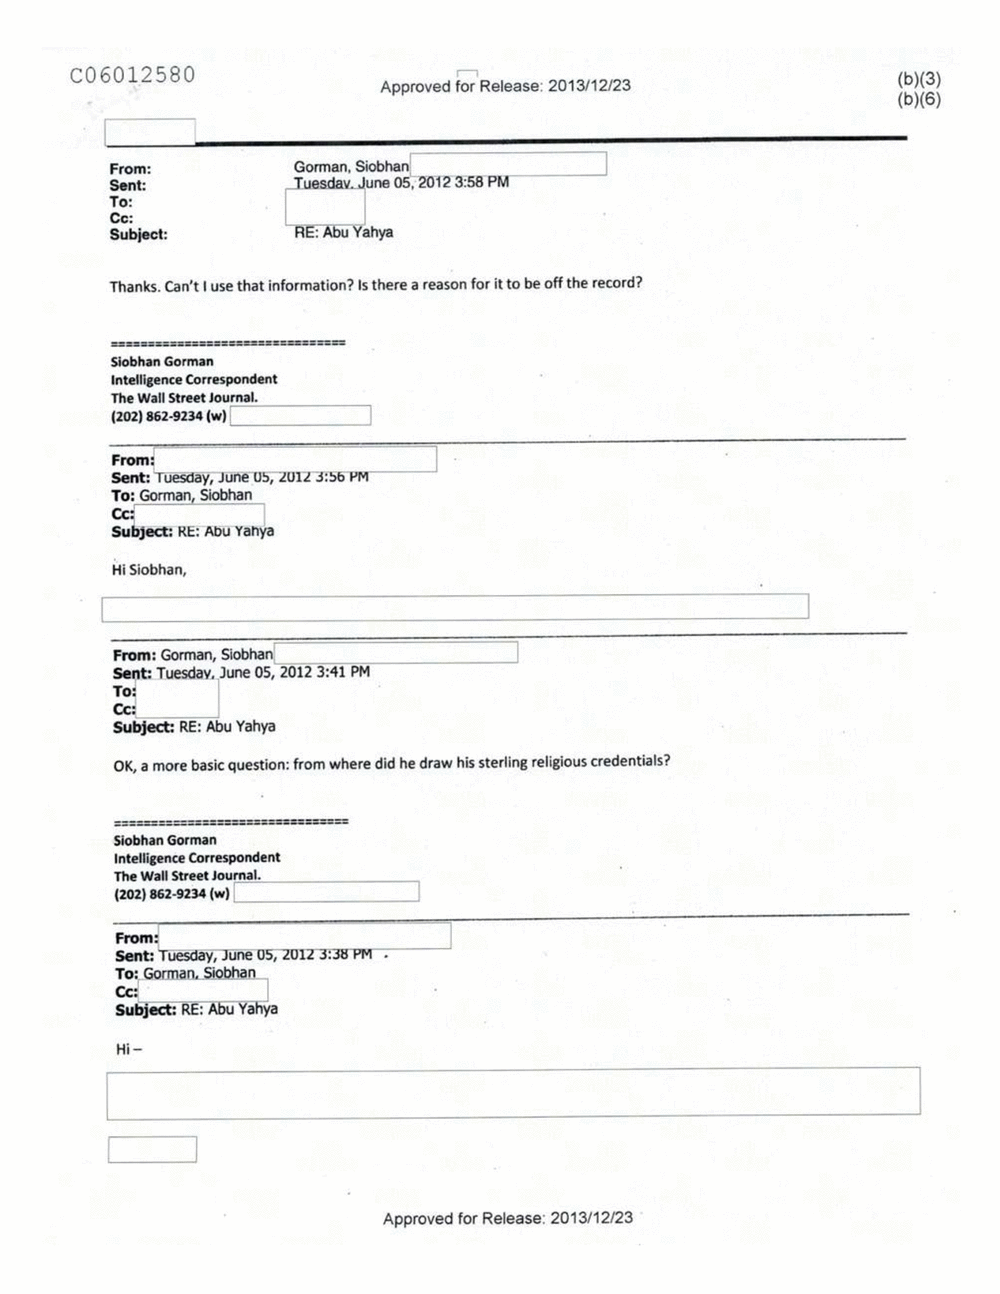 Page 118 from Email Correspondence Between Reporters and CIA Flacks